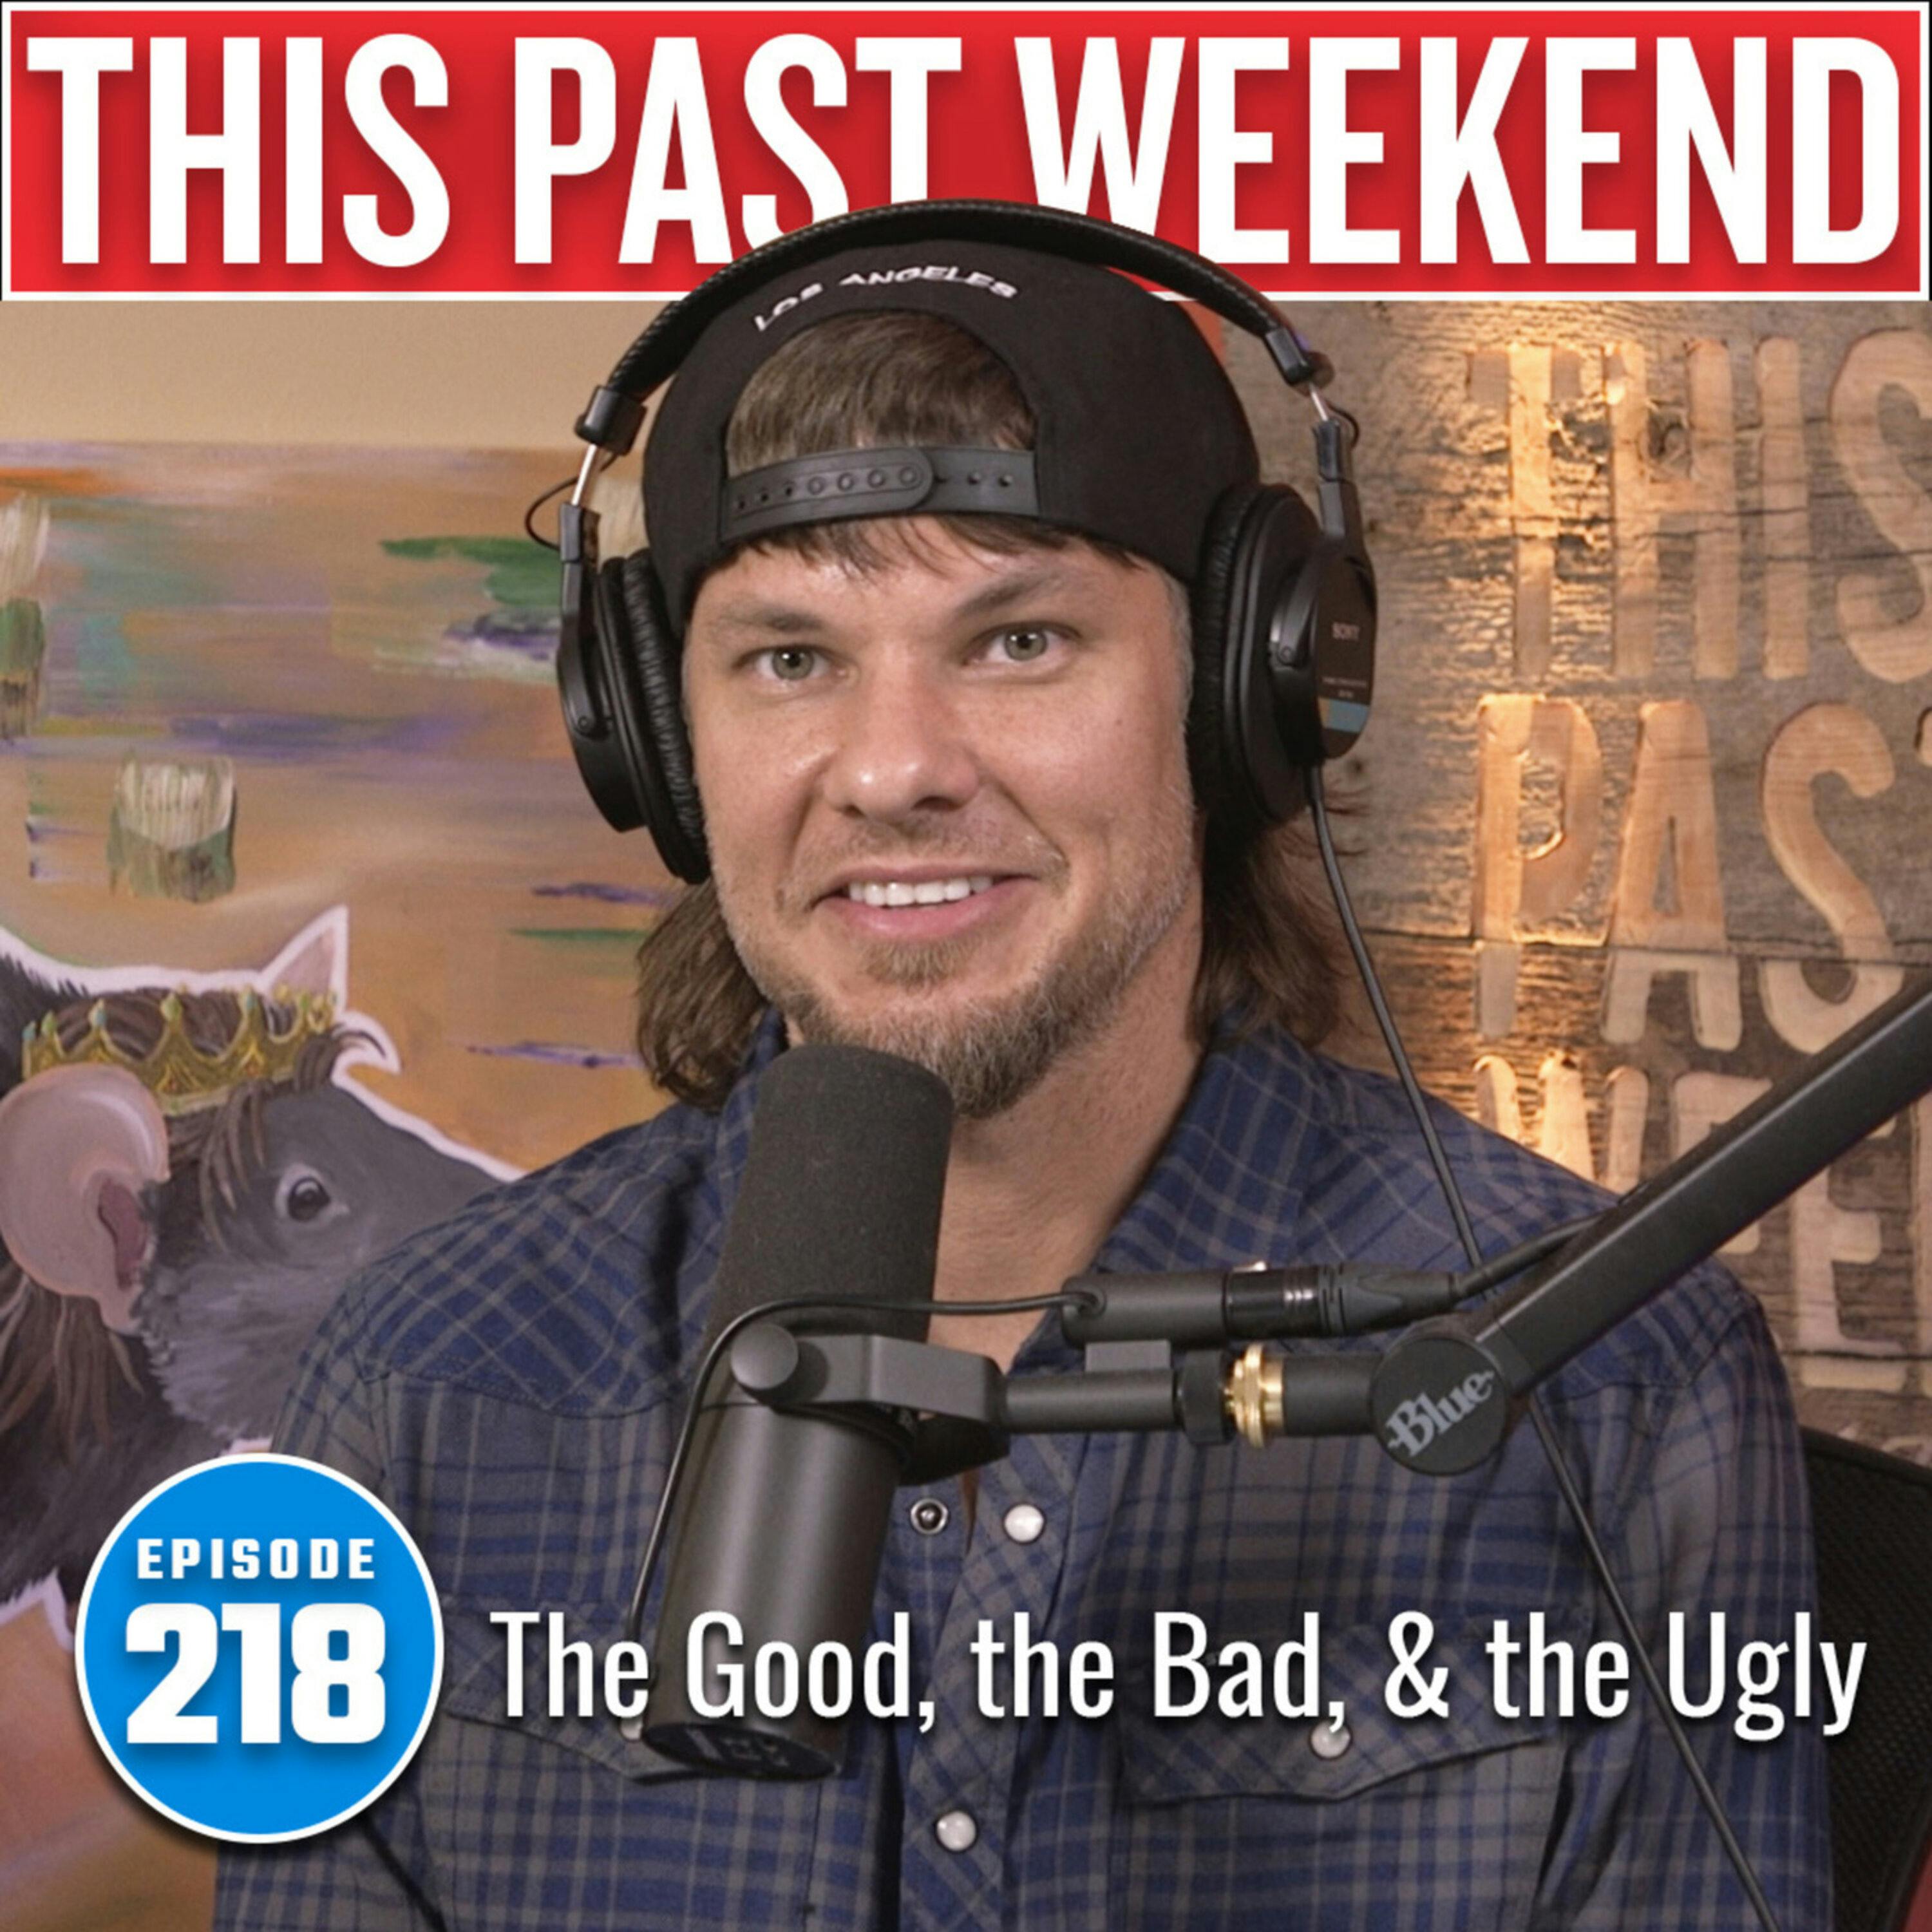 The Good, the Bad, and the Ugly | This Past Weekend #218 by Theo Von